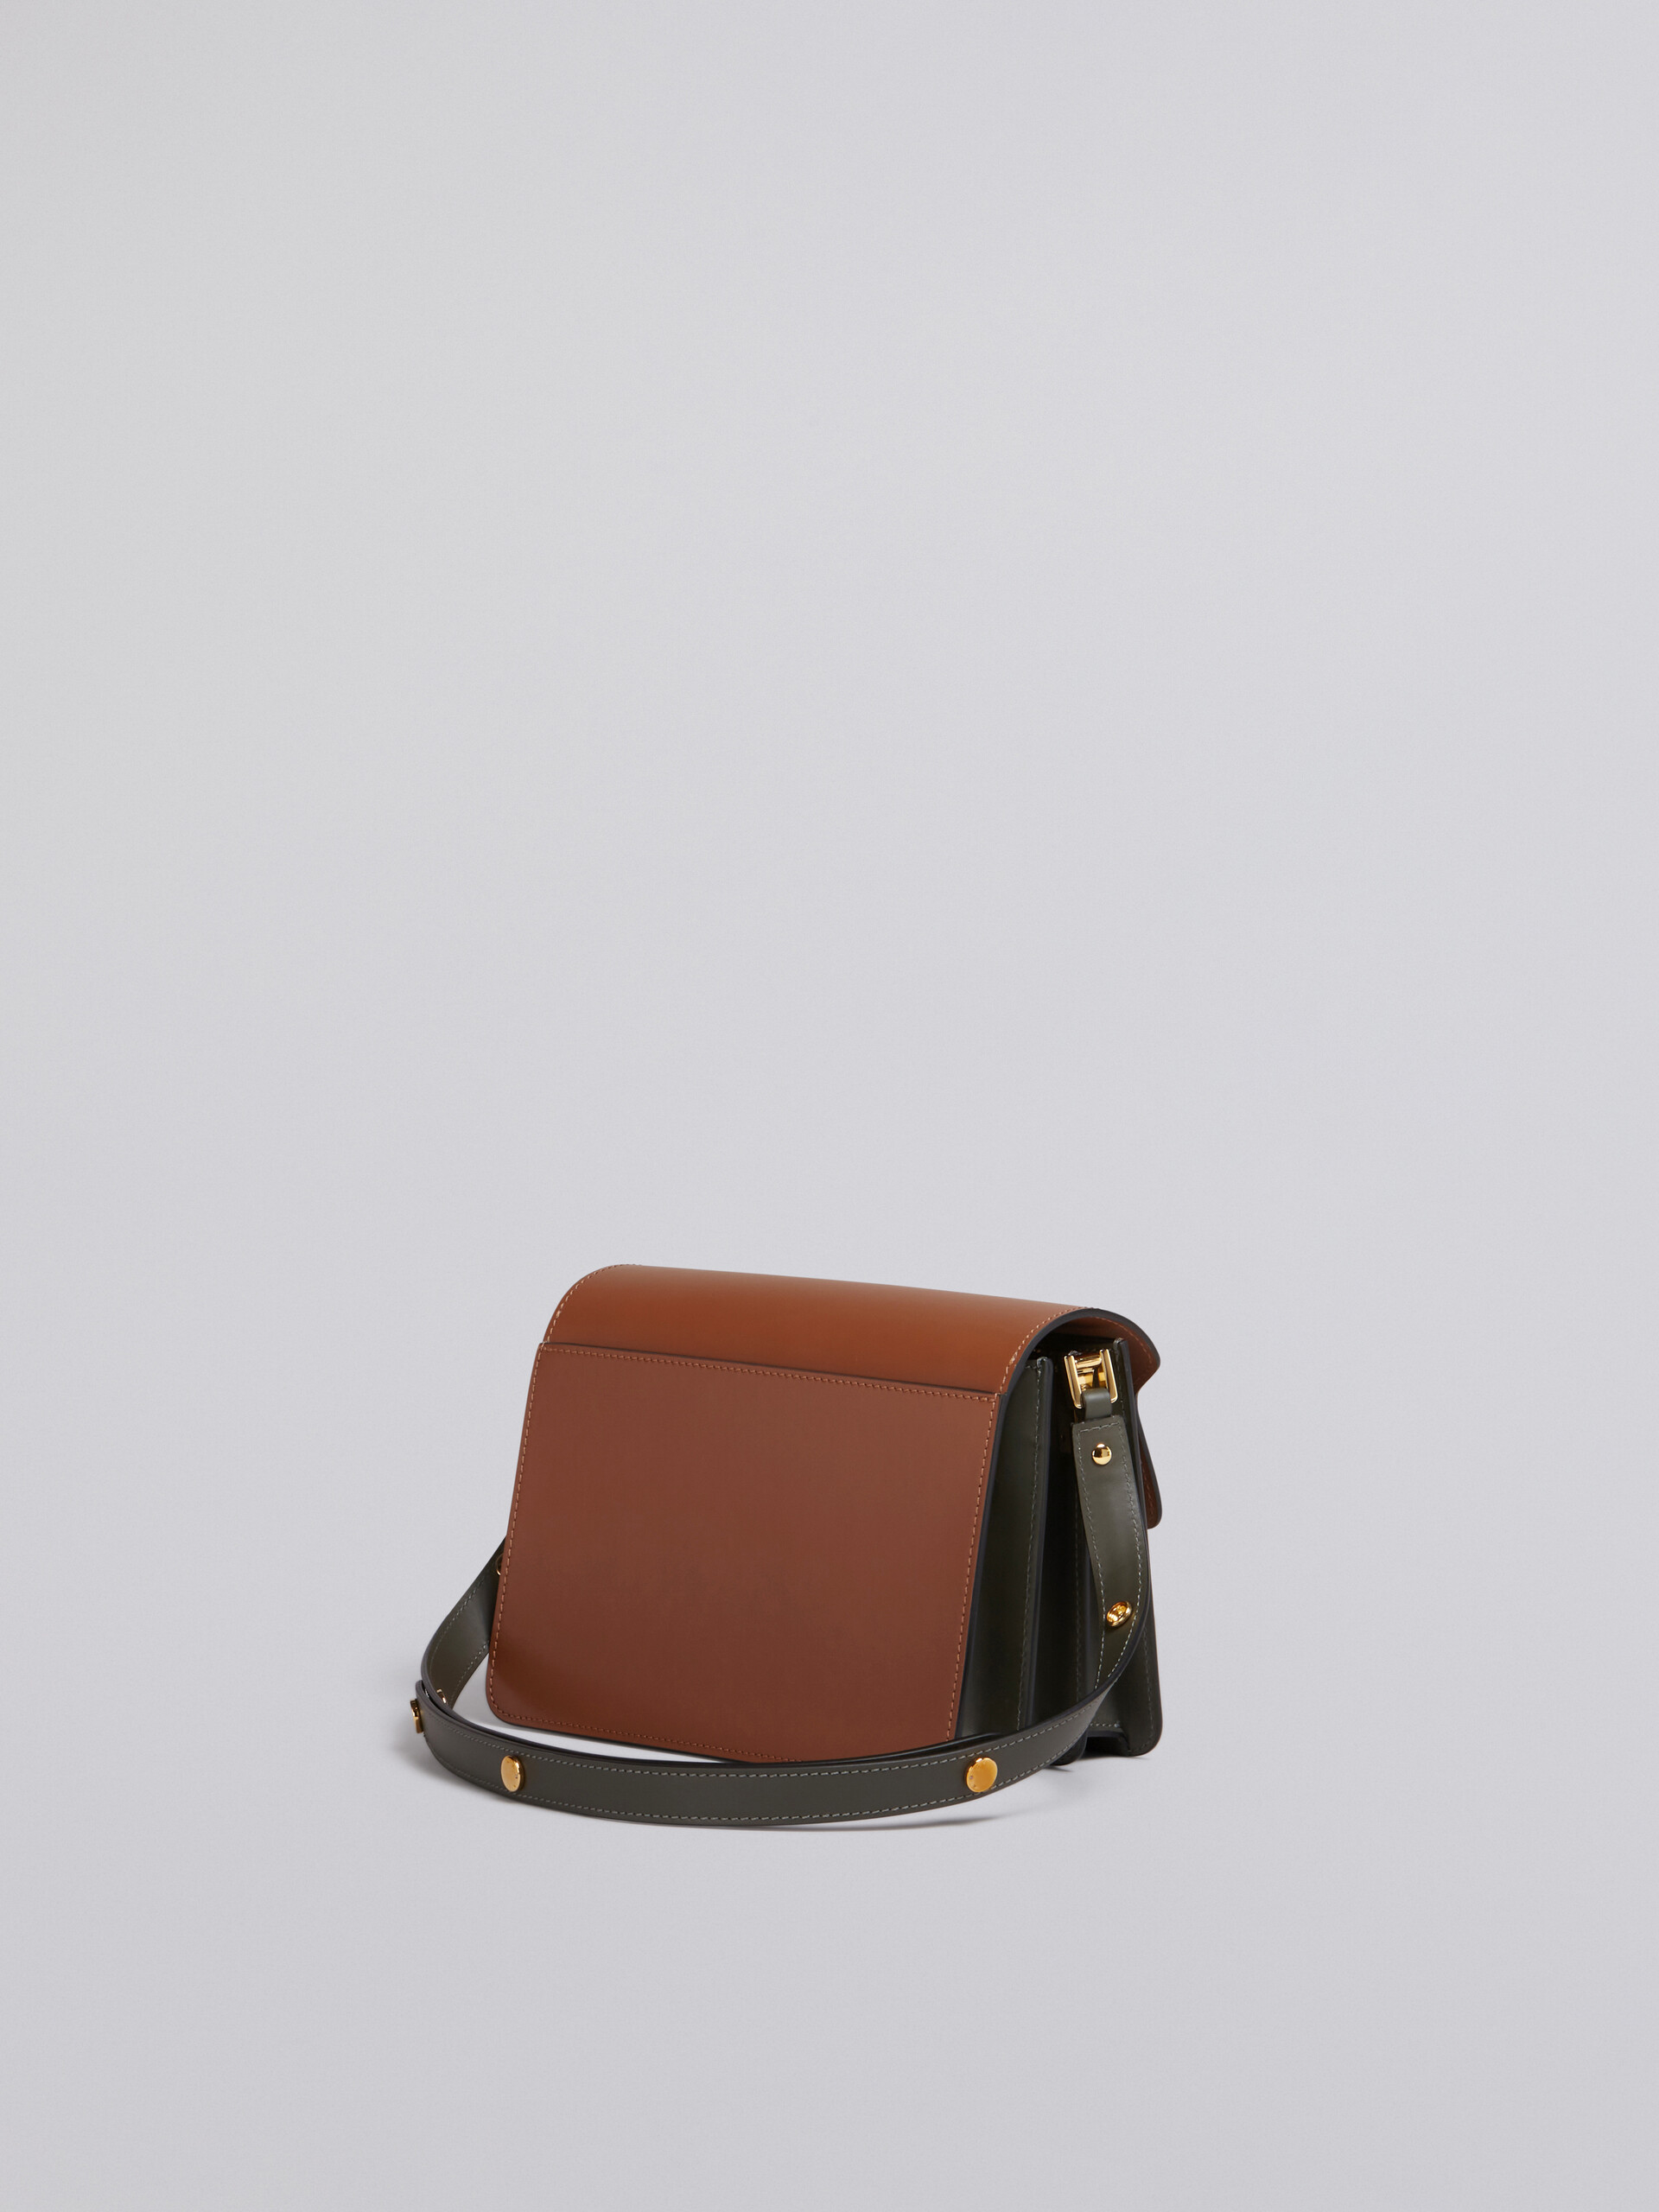 TRUNK media bag in brown white and green leather - Shoulder Bags - Image 2